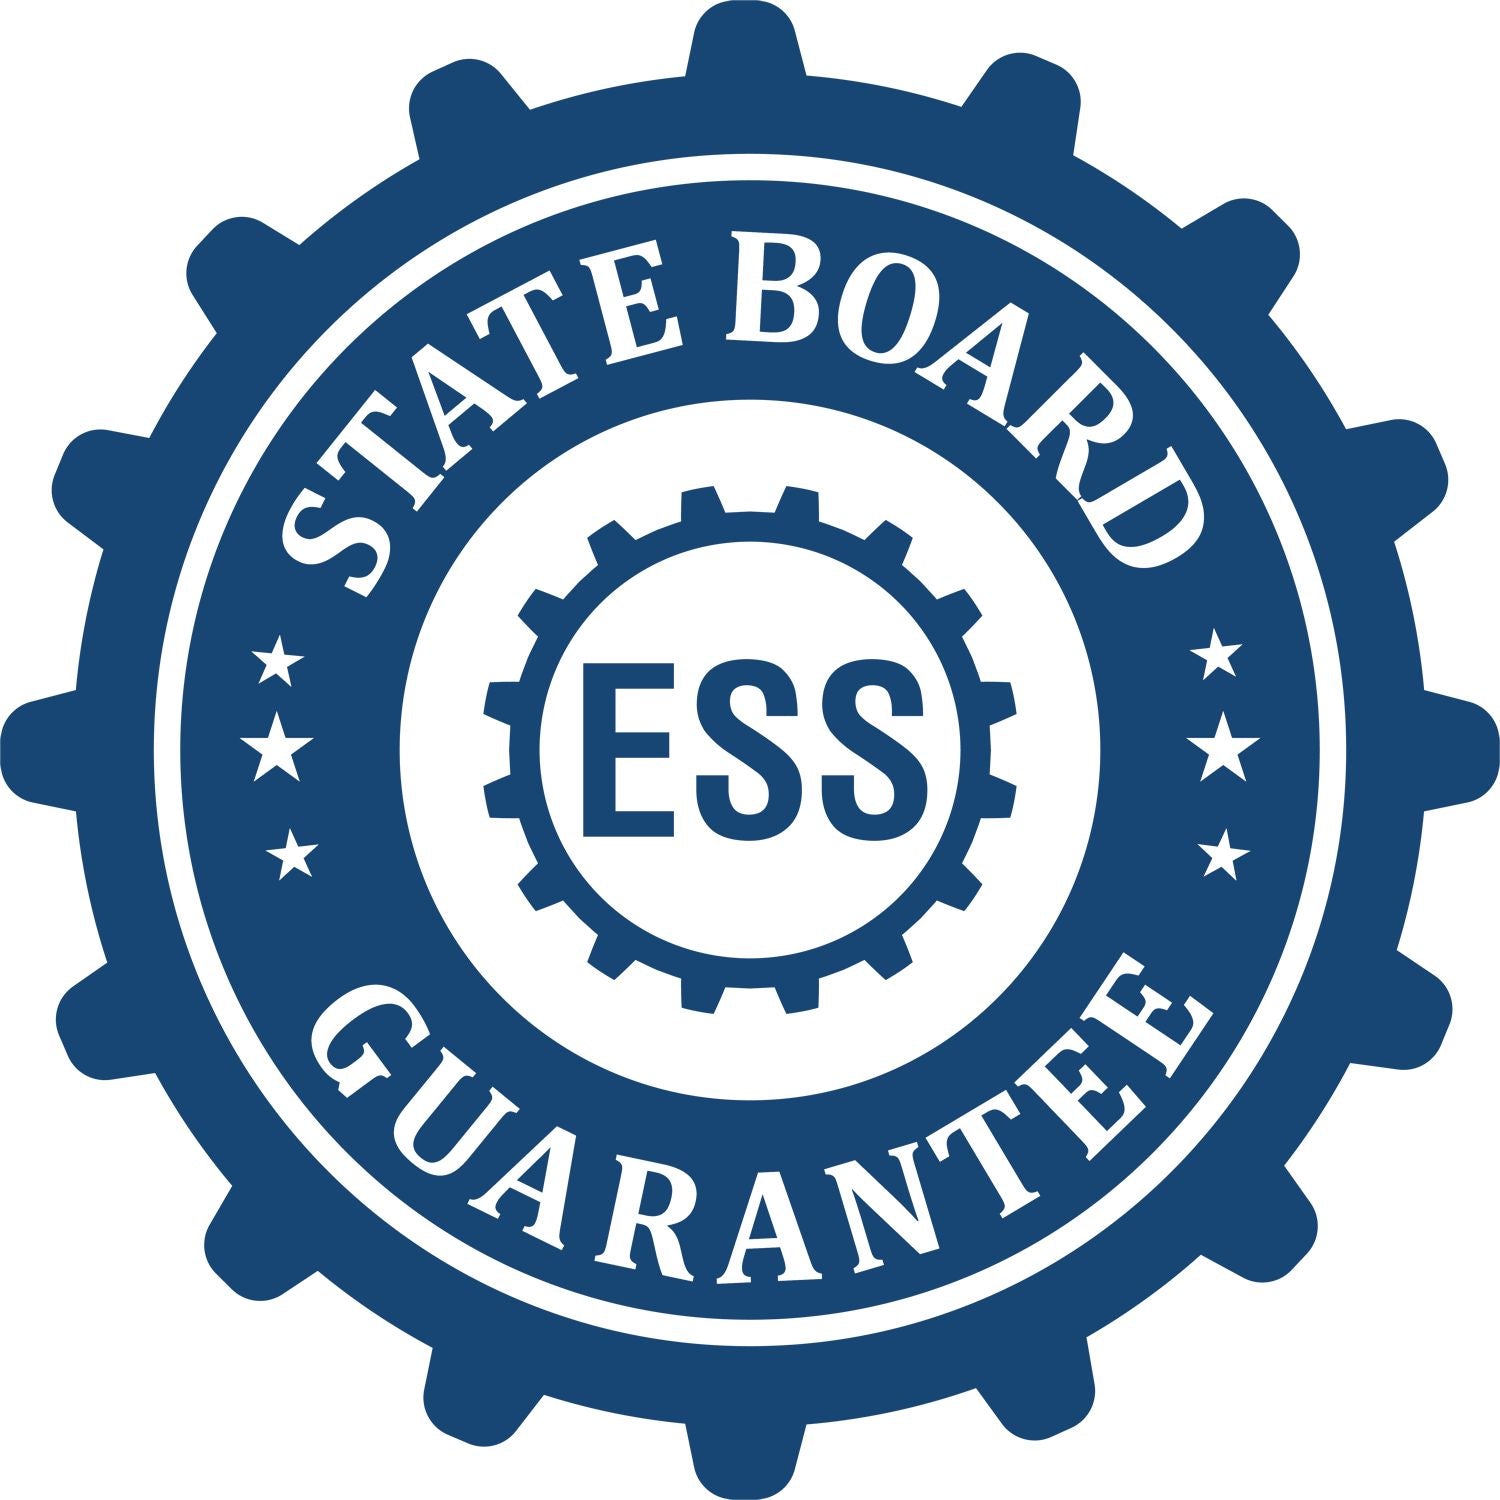 An emblem in a gear shape illustrating a state board guarantee for the Soft Hawaii Professional Engineer Seal product.